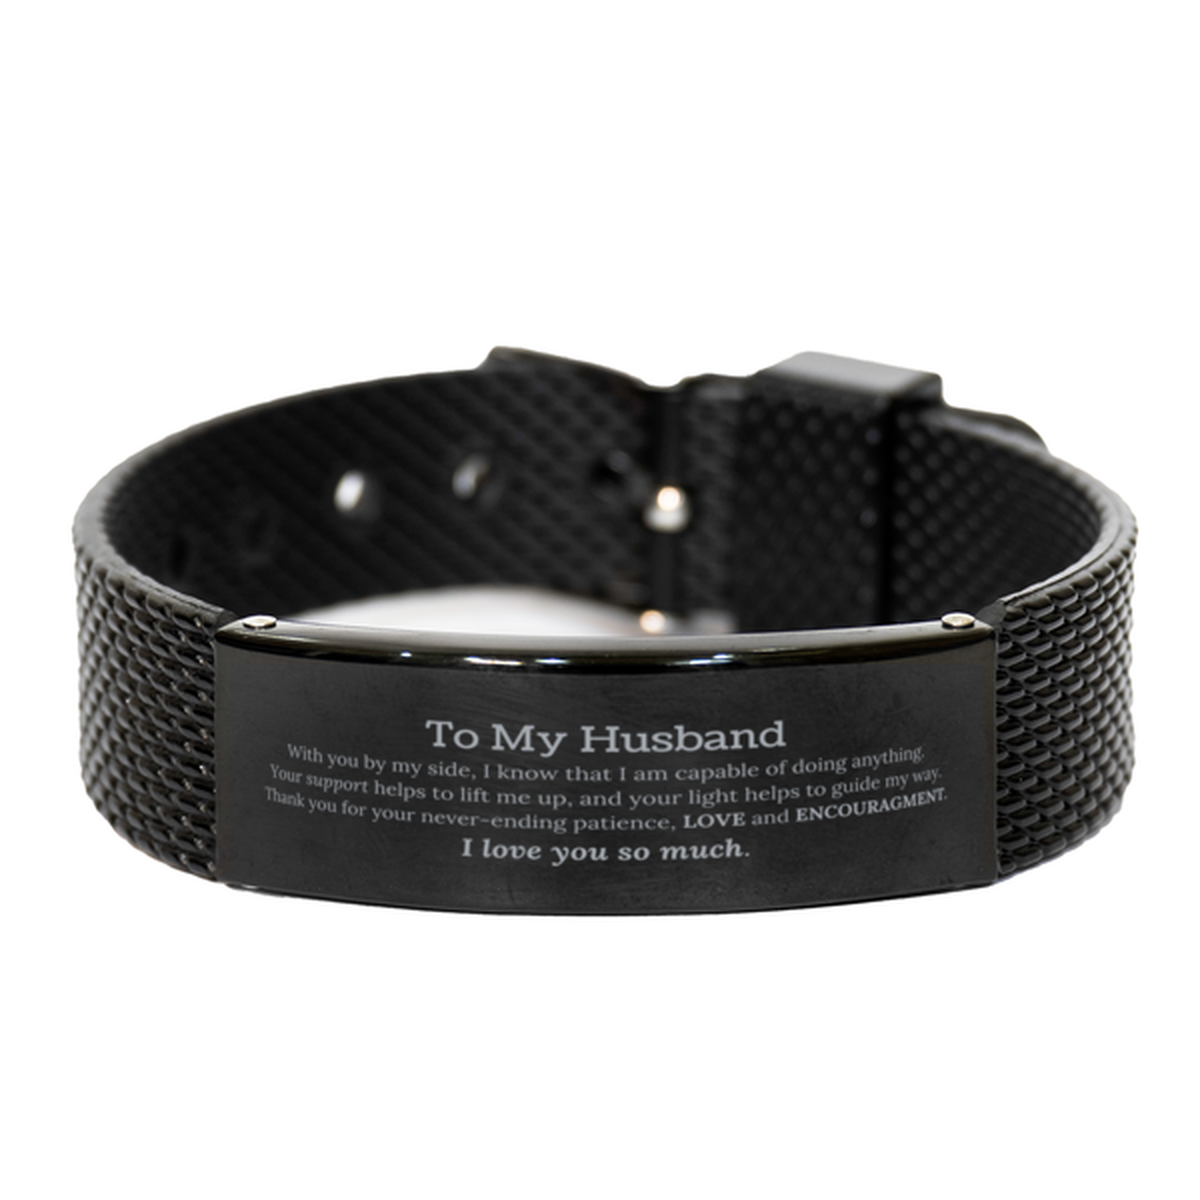 Appreciation Husband Black Shark Mesh Bracelet Gifts, To My Husband Birthday Christmas Wedding Keepsake Gifts for Husband With you by my side, I know that I am capable of doing anything. I love you so much